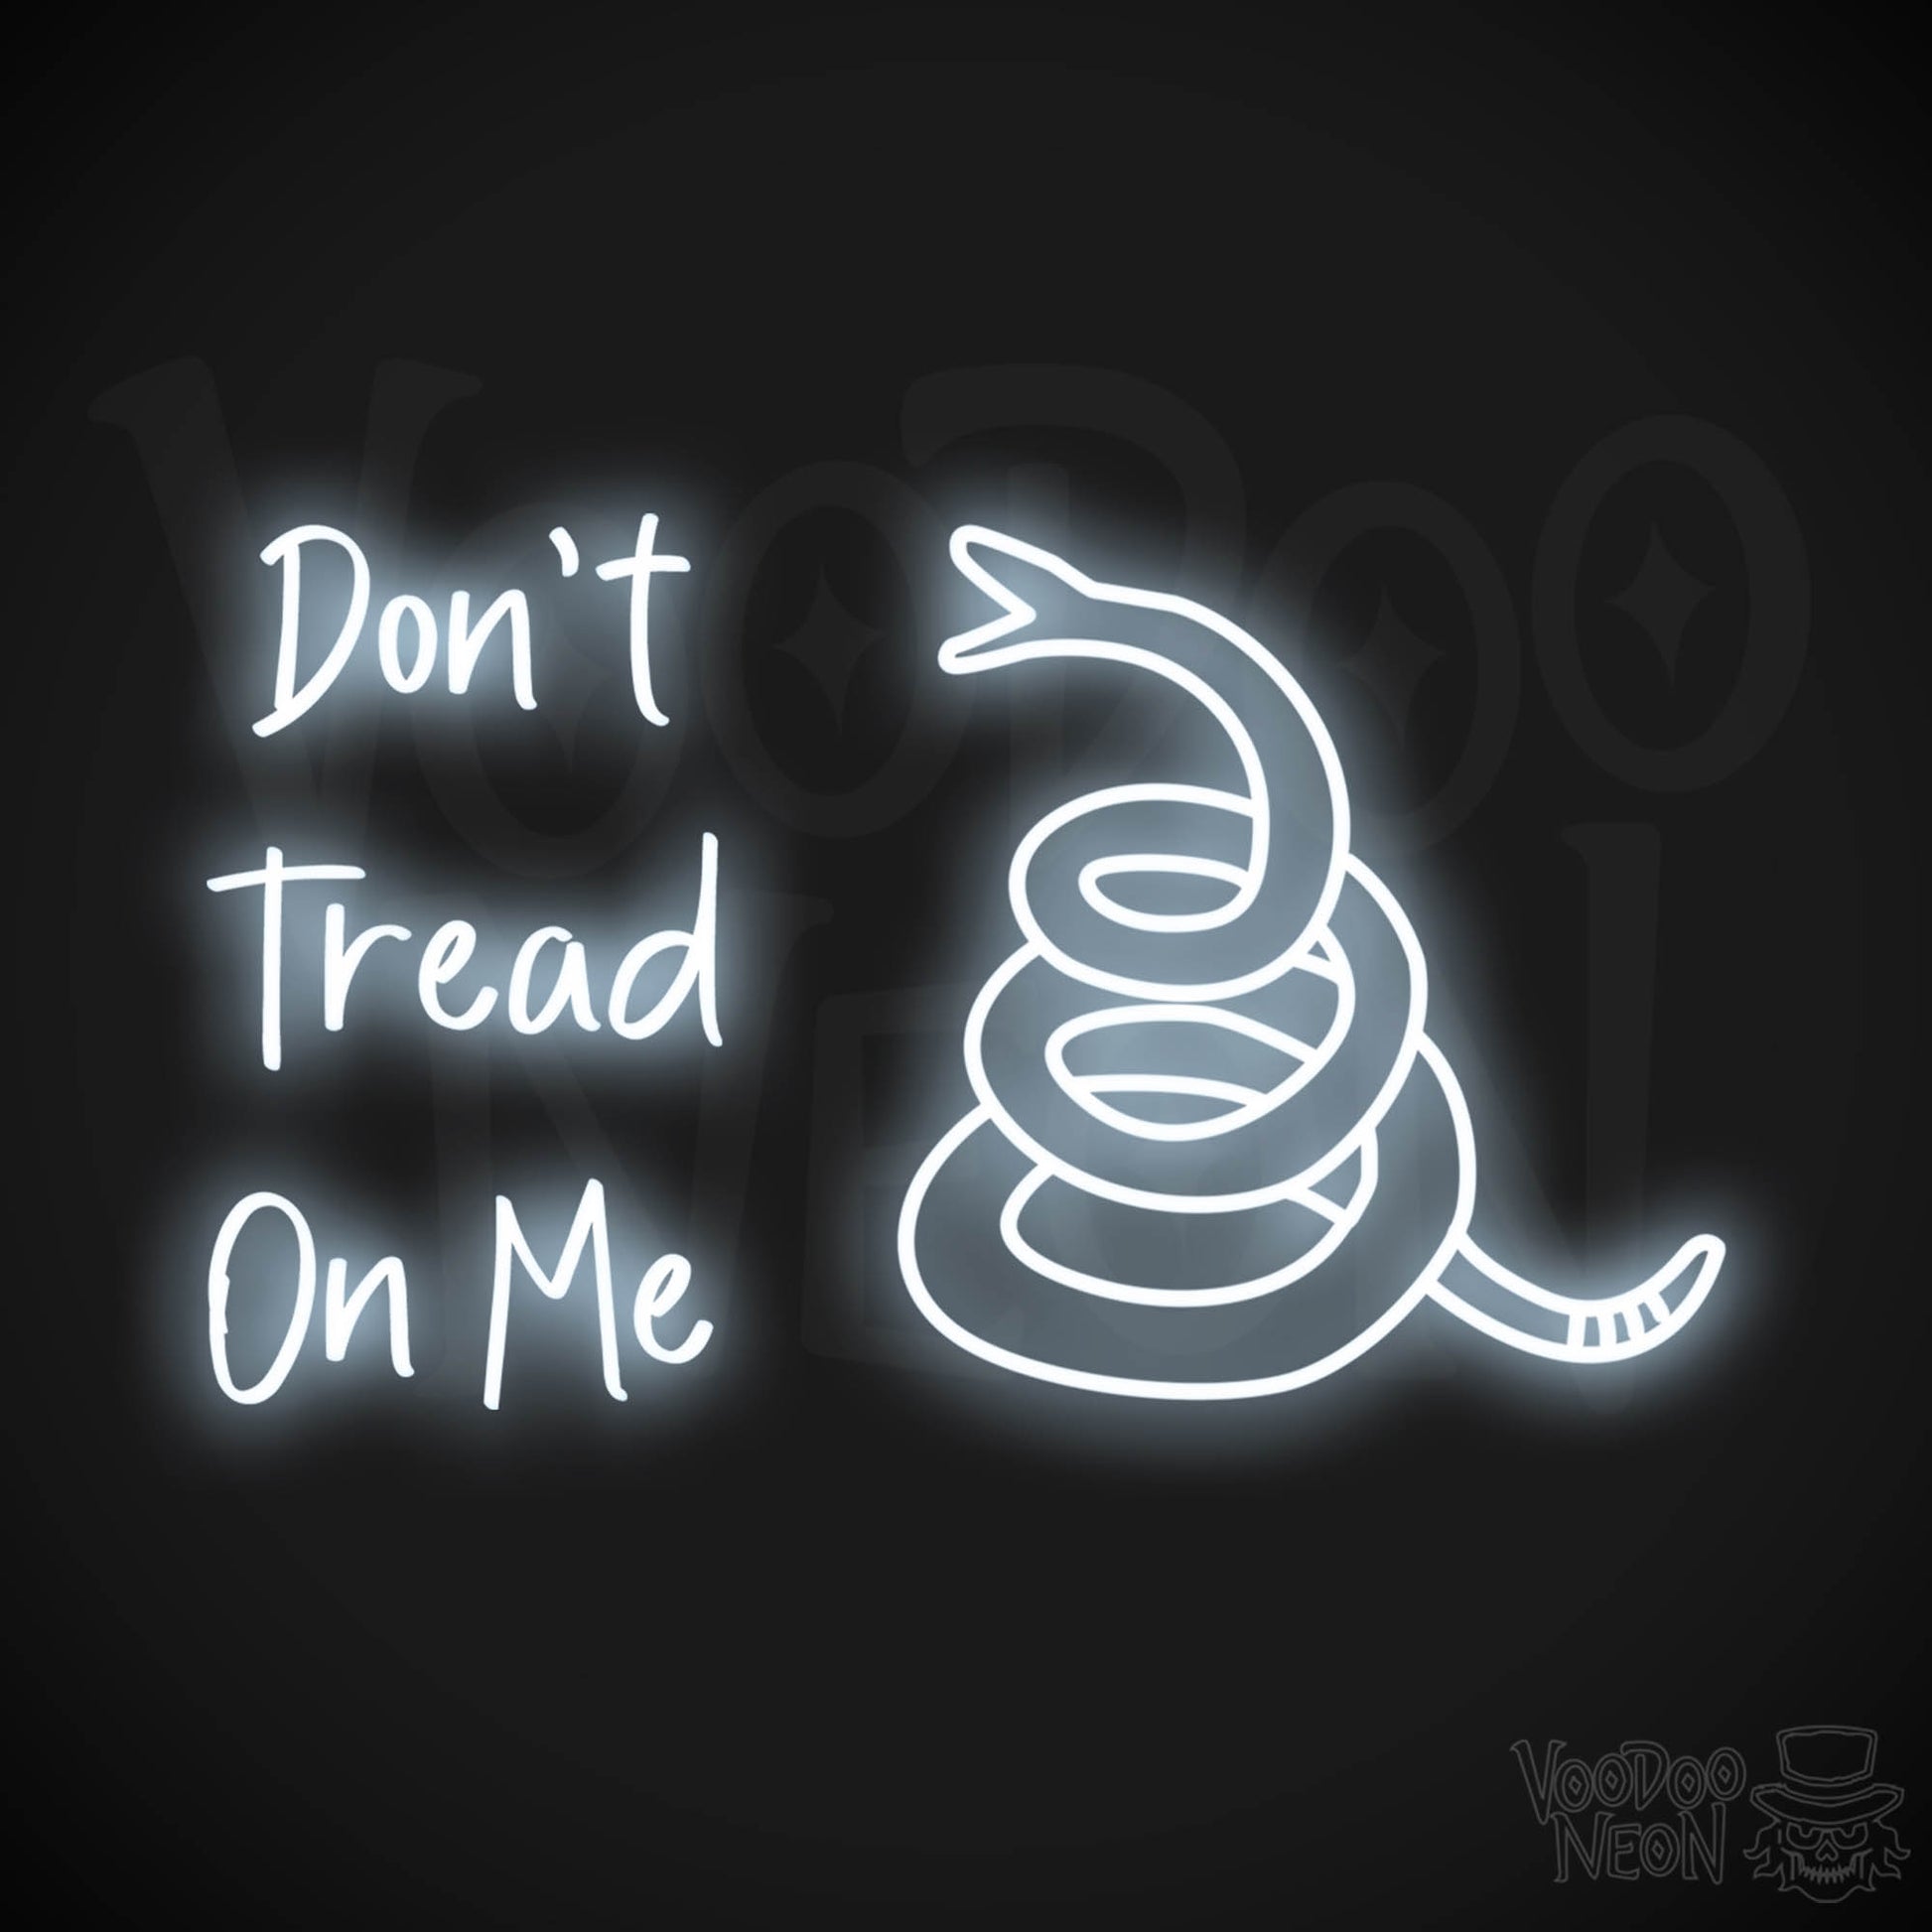 Don't Tread On Me LED Neon - Cool White